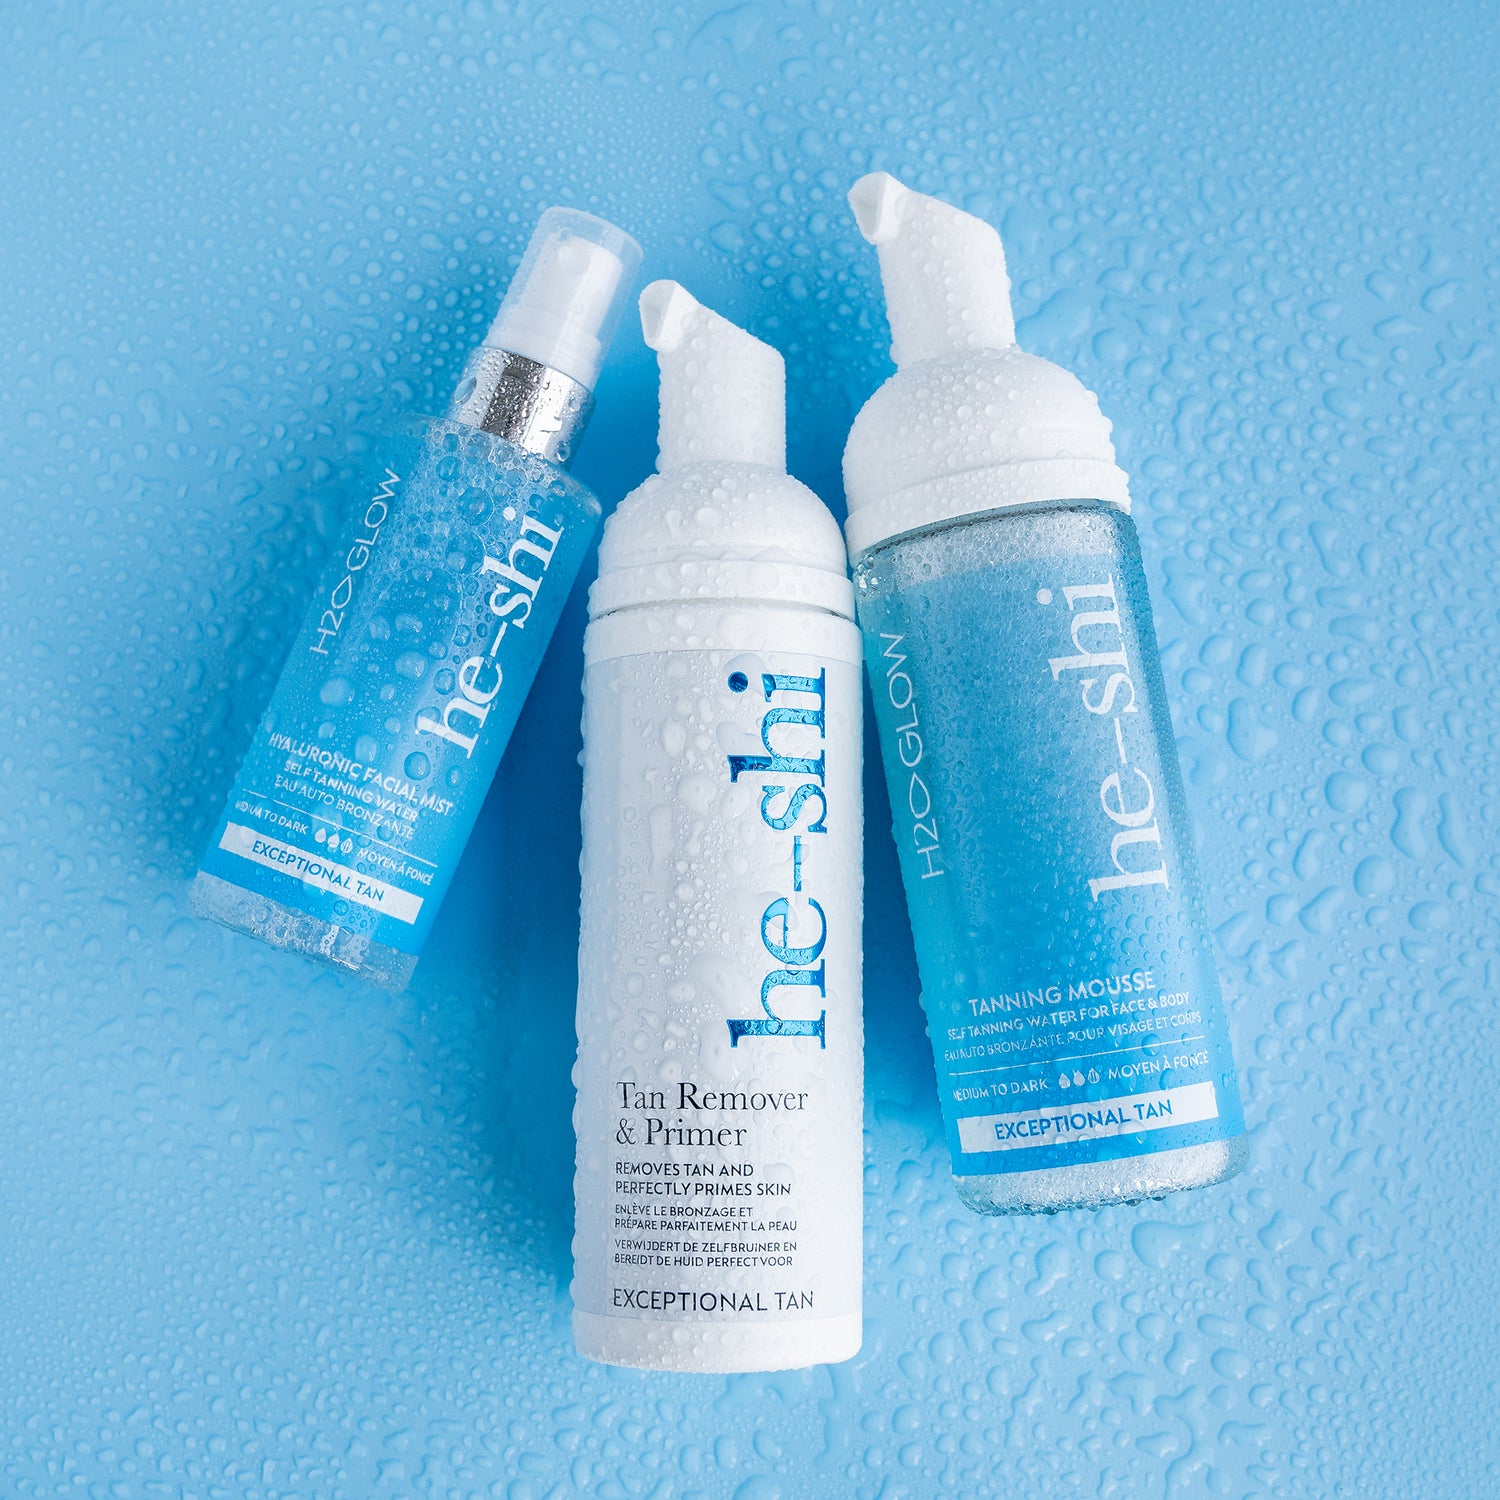 He-Shi H2O Glow Mousse, Mist and Tan Remover and Primer